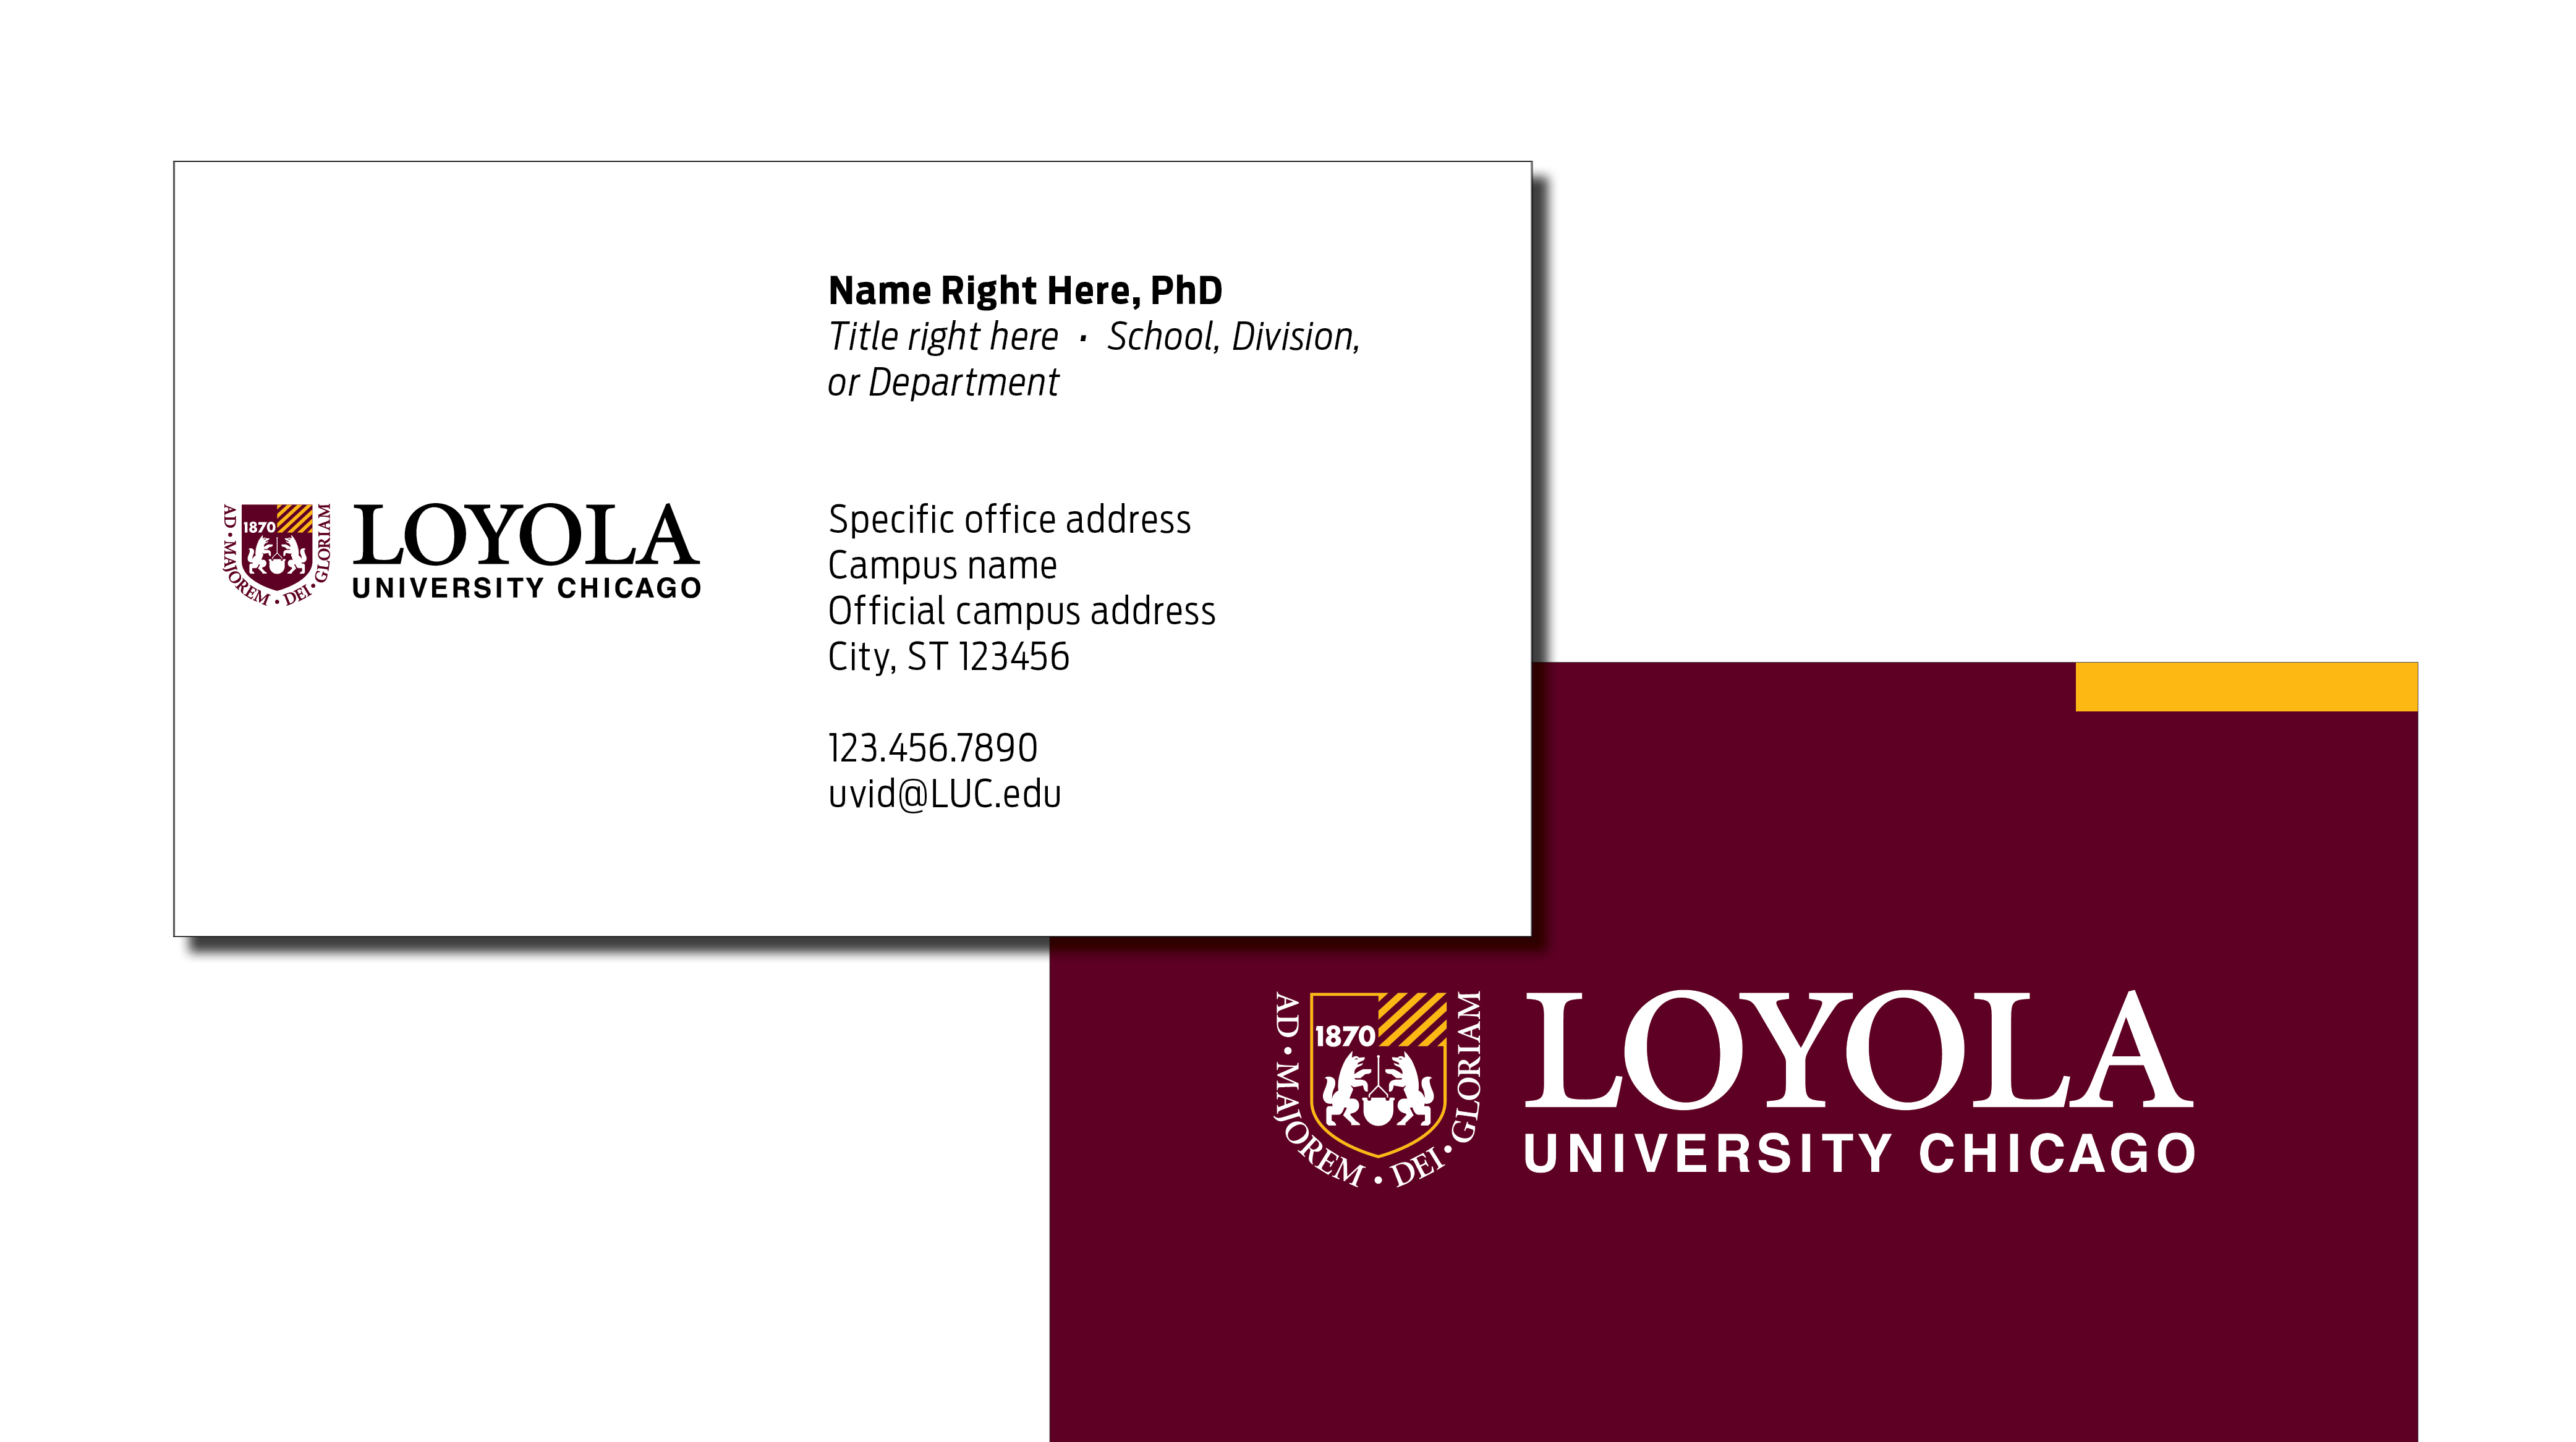 Example of Loyola Chicago business card, front and back, using placeholder copy. One side is text with logo, the other is maroon with reverse logo